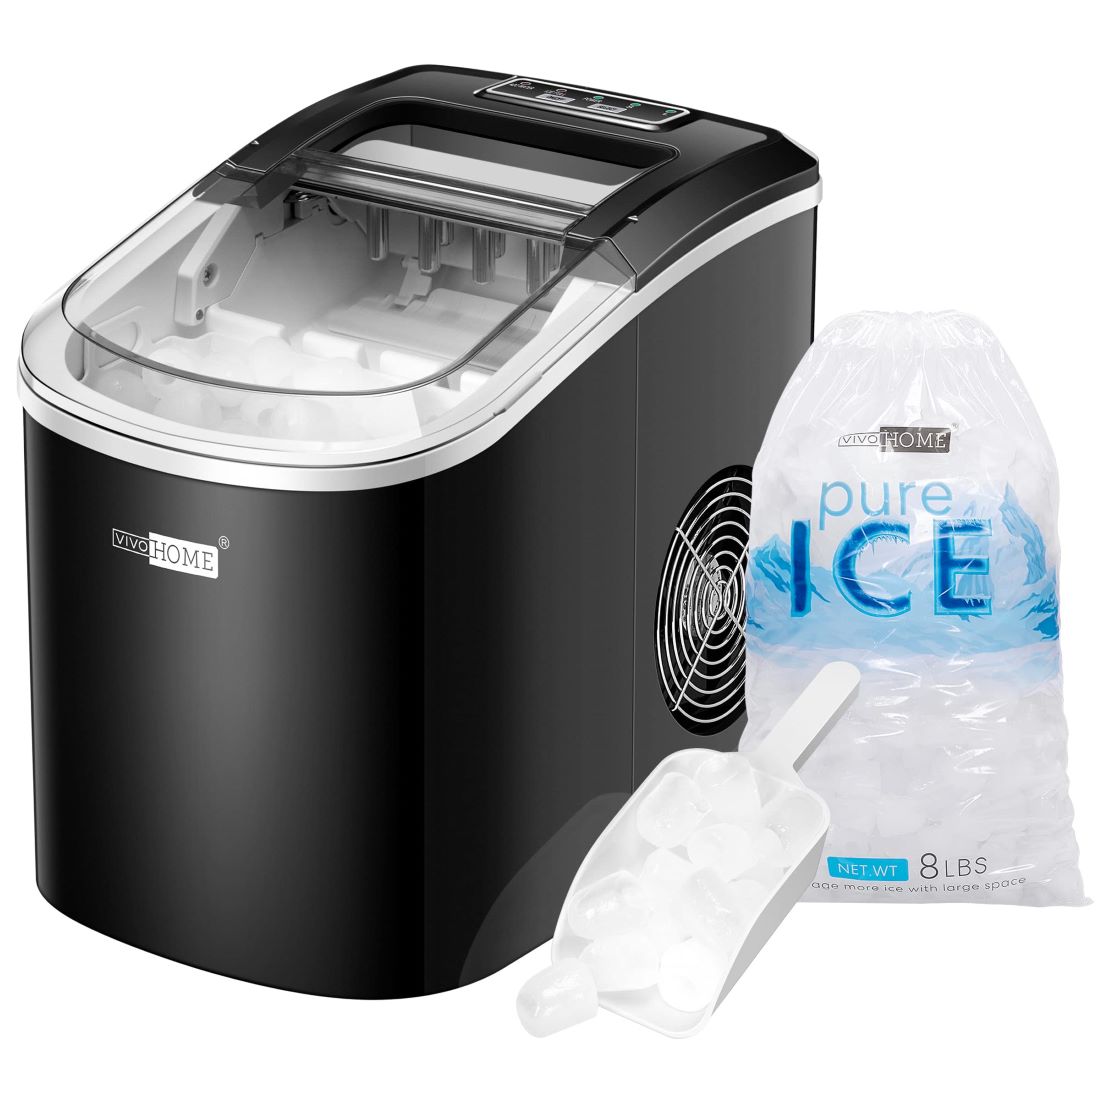 VIVOHOME Electric Portable Compact Countertop Automatic Ice Cube Maker Machine 26lbs/day Black